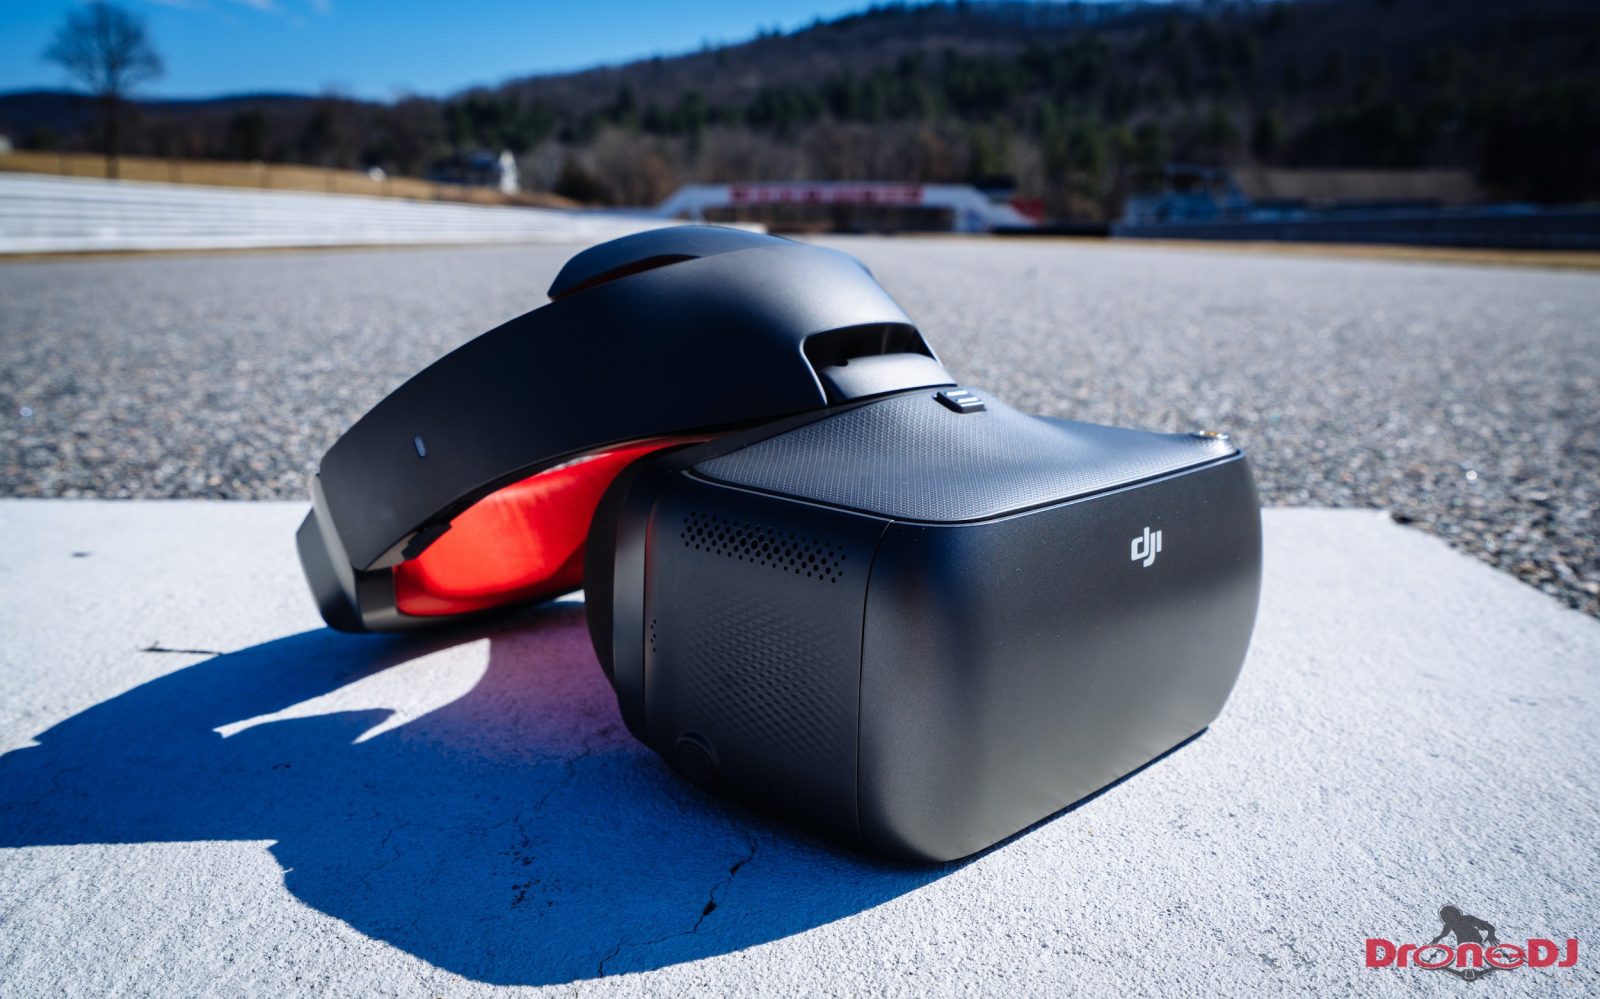 Review: DJI's FPV Goggles Racing Edition track-tested at Lime Rock Park